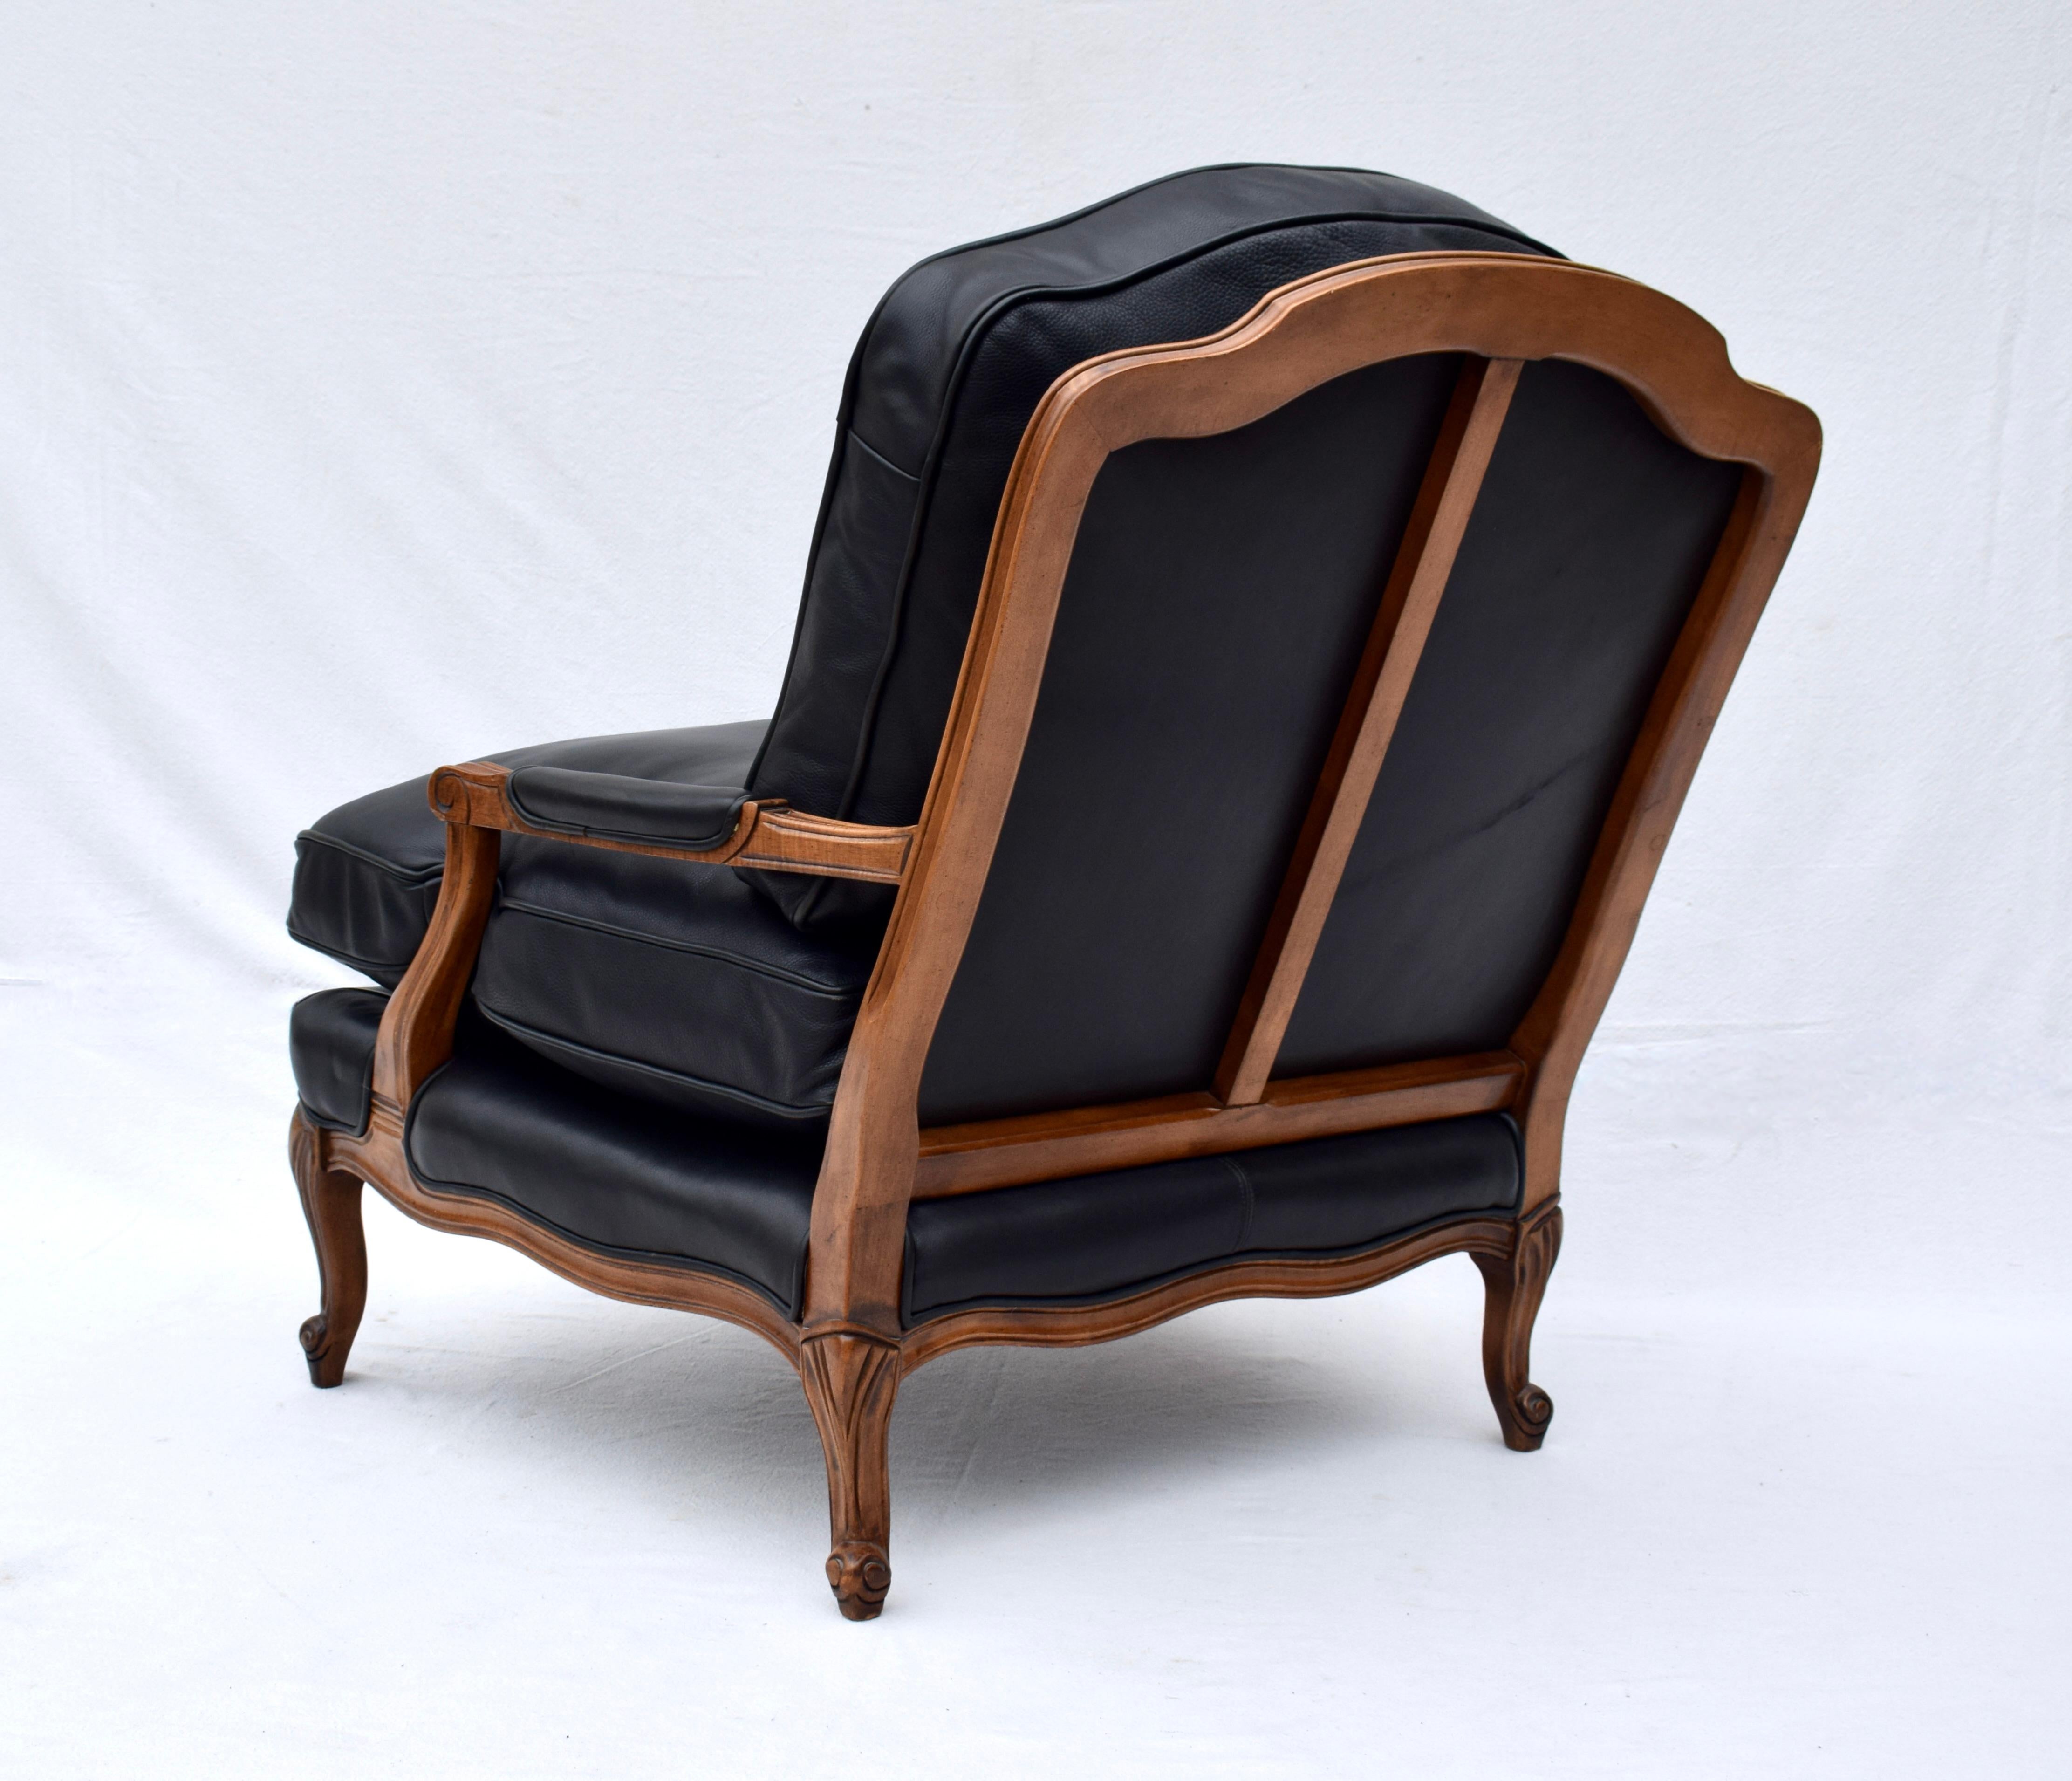 Woodward & Lothrop Top of the Line Black Leather and Walnut Club Chair & Ottoman 1